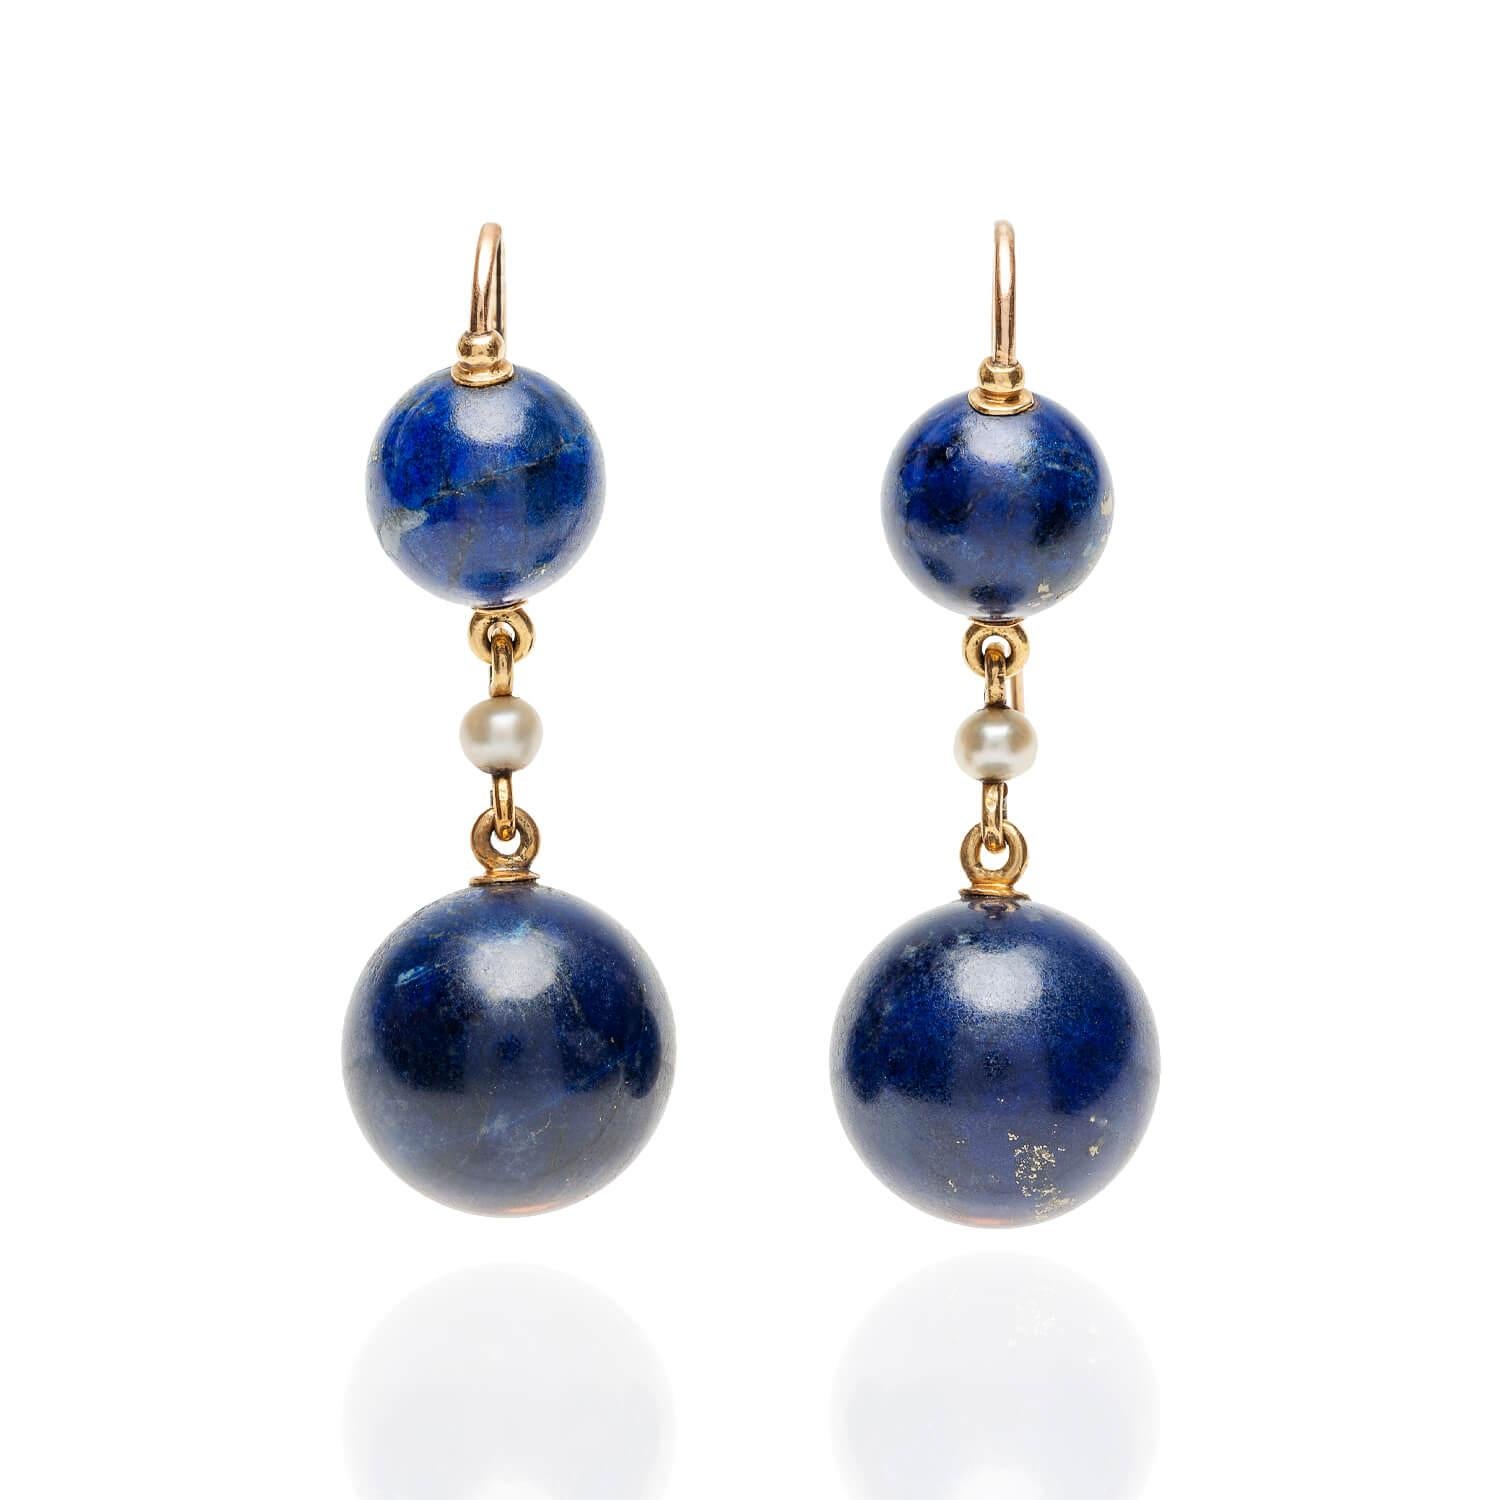 Expensive-Looking Silver Plated CLASSIC Lapis Lazuli Earrings Vintage Jewelry 